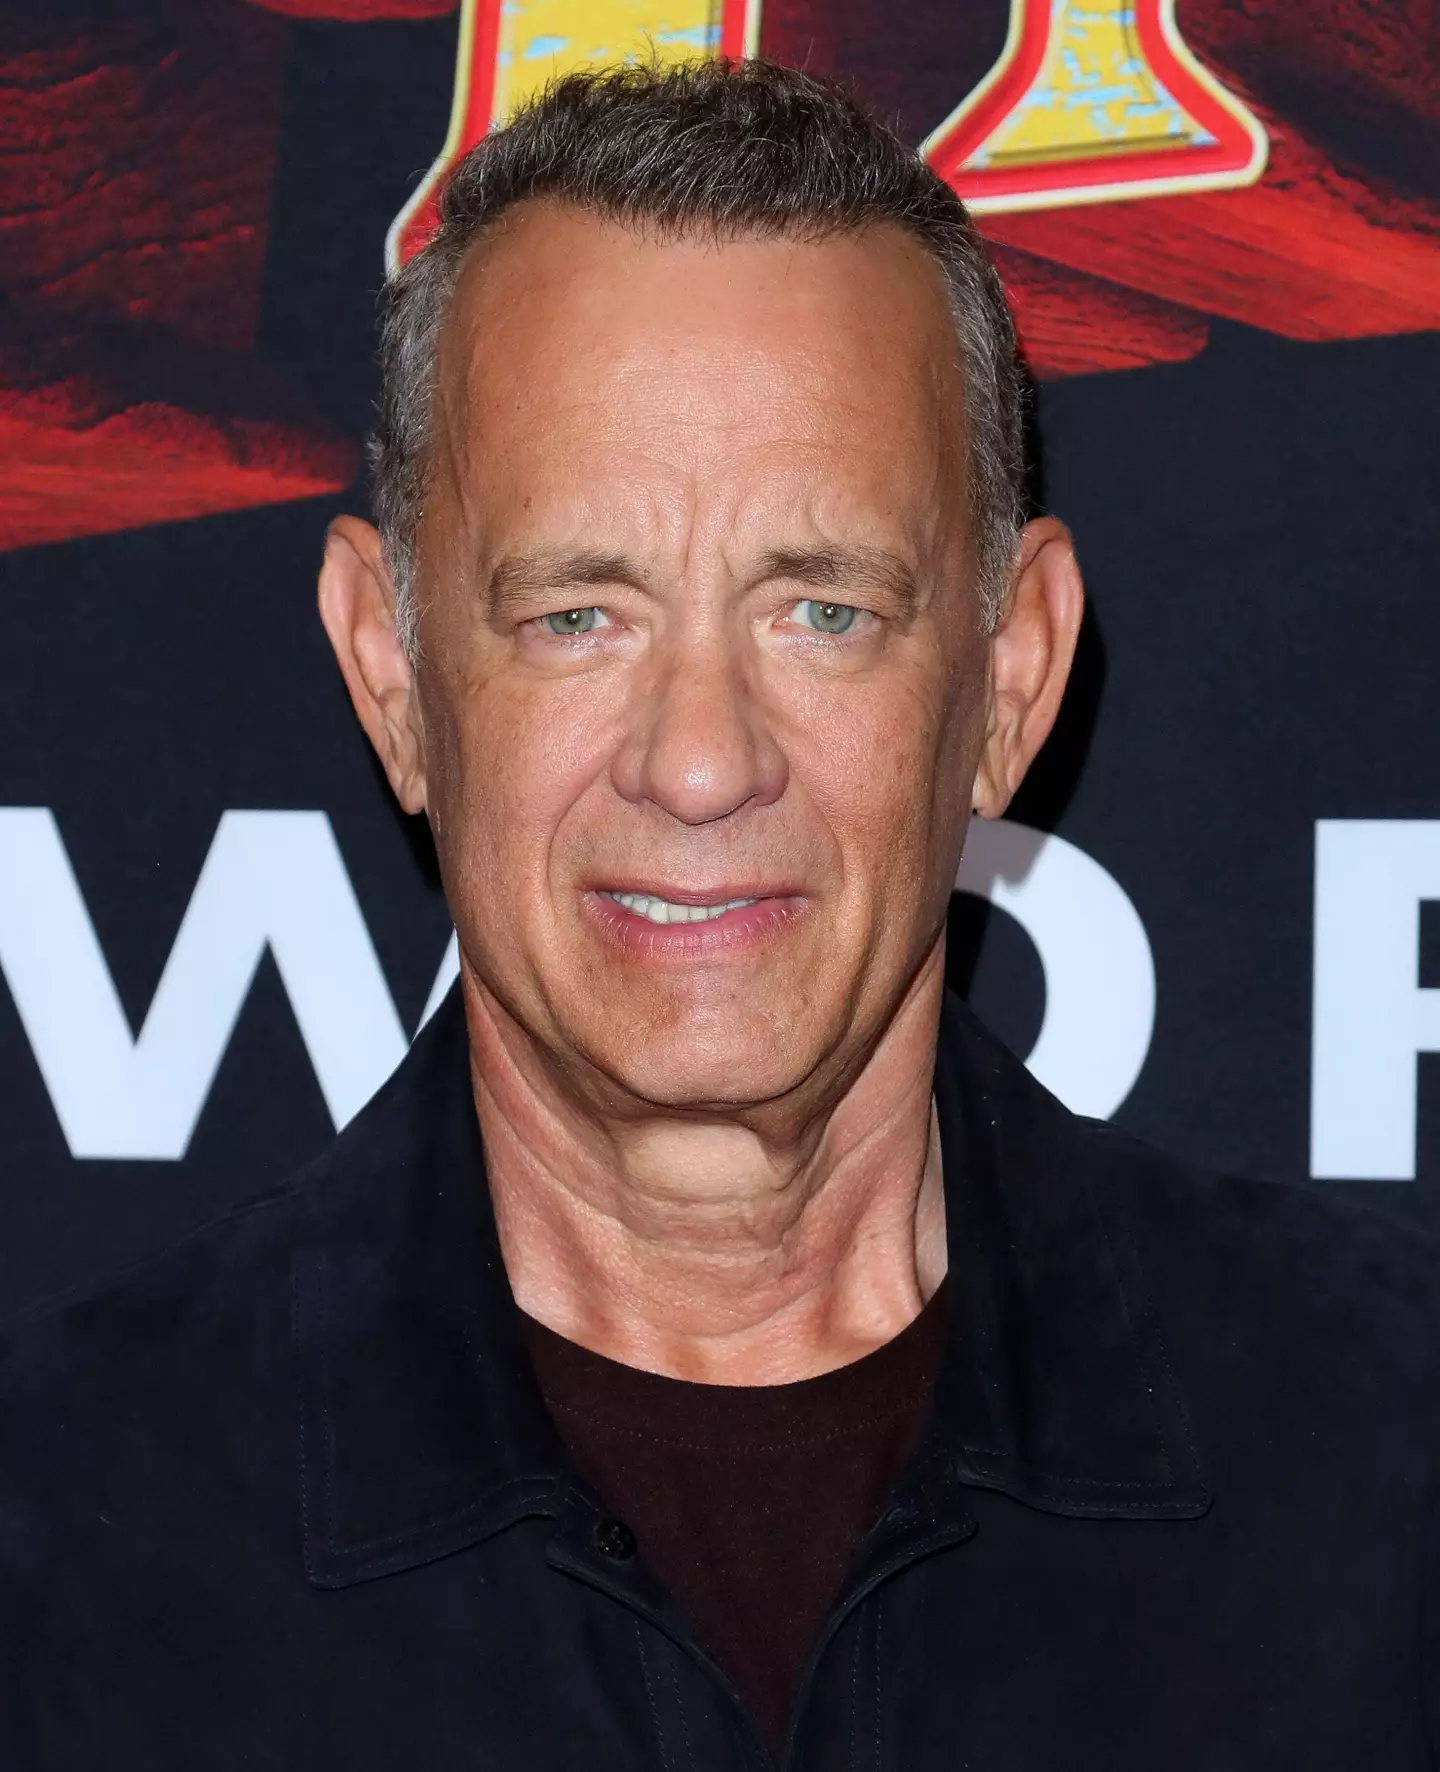 Tom Hanks said discussions about a Forrest Gump sequel didn't last long.